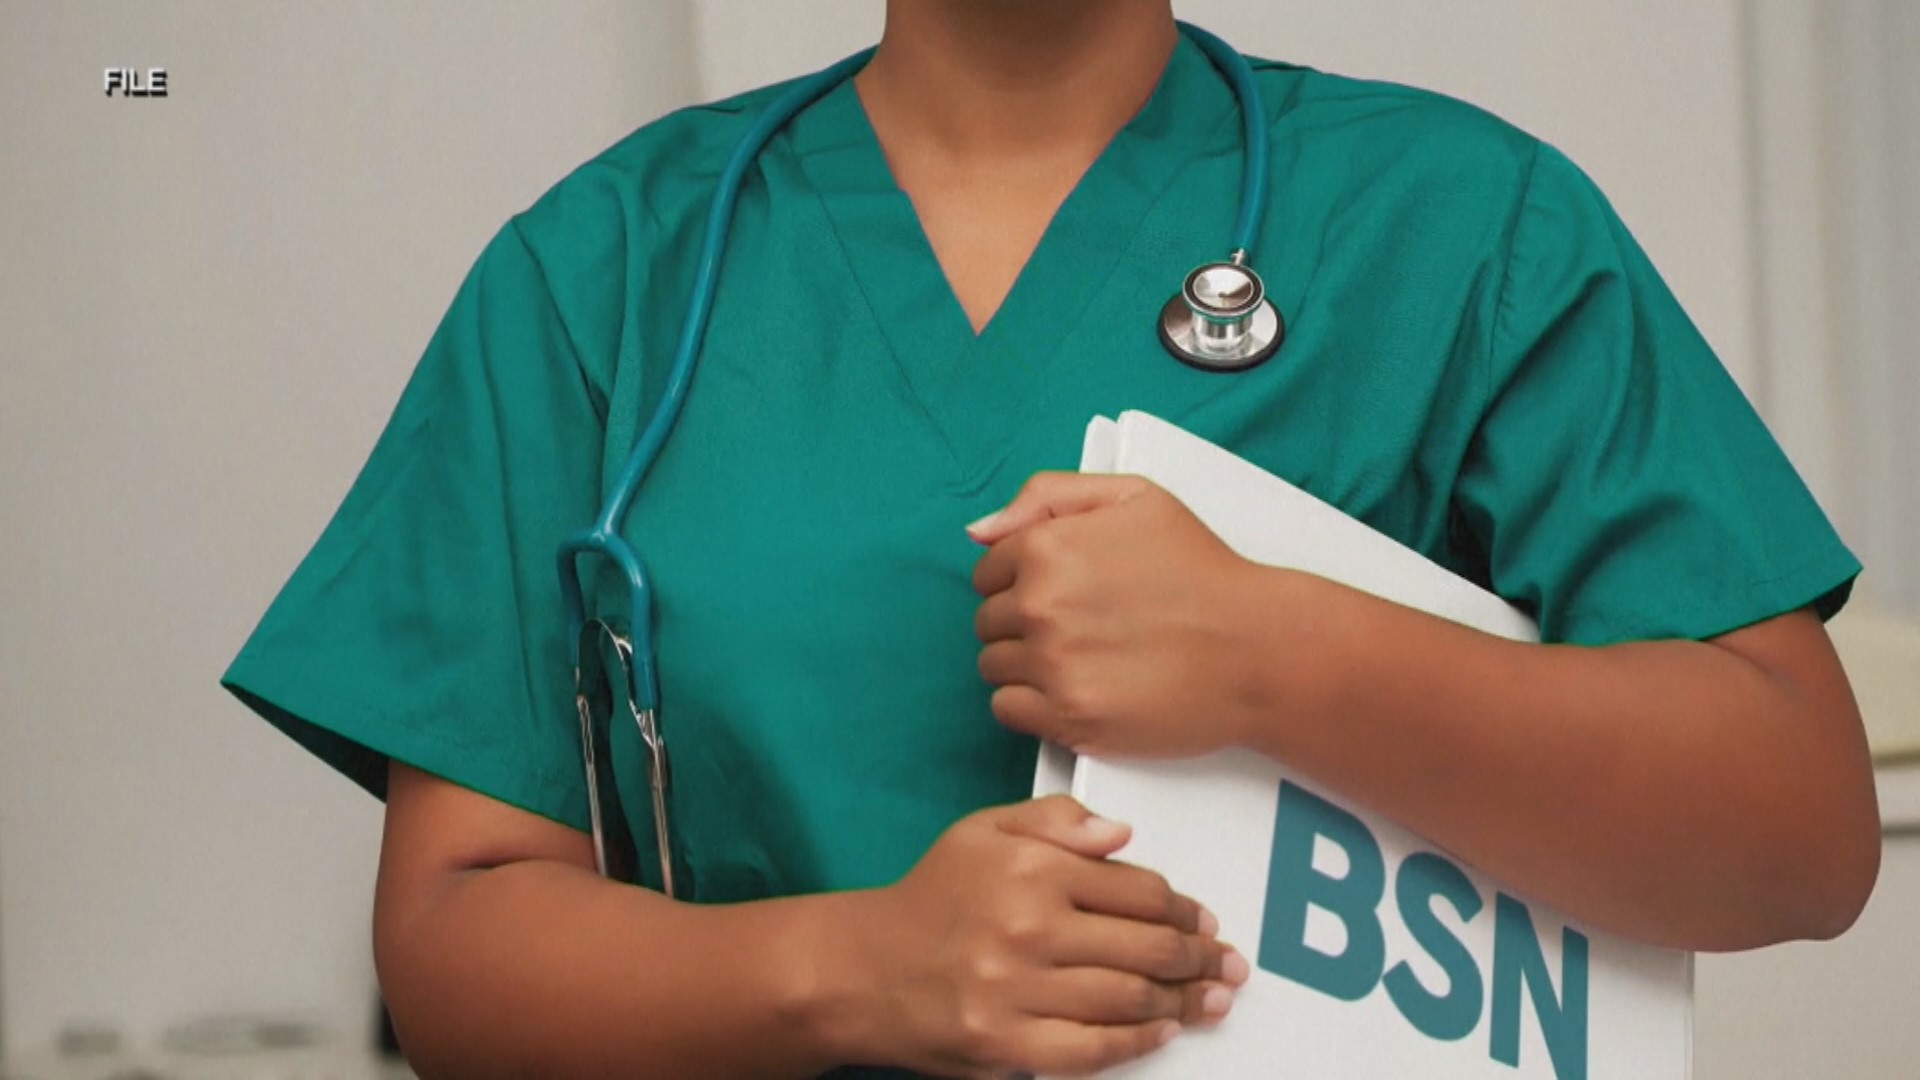 Nearly 60% of survey respondents in a 2020 State of Iowa nursing report said there is a shortage of qualified job applicants for nursing positions.